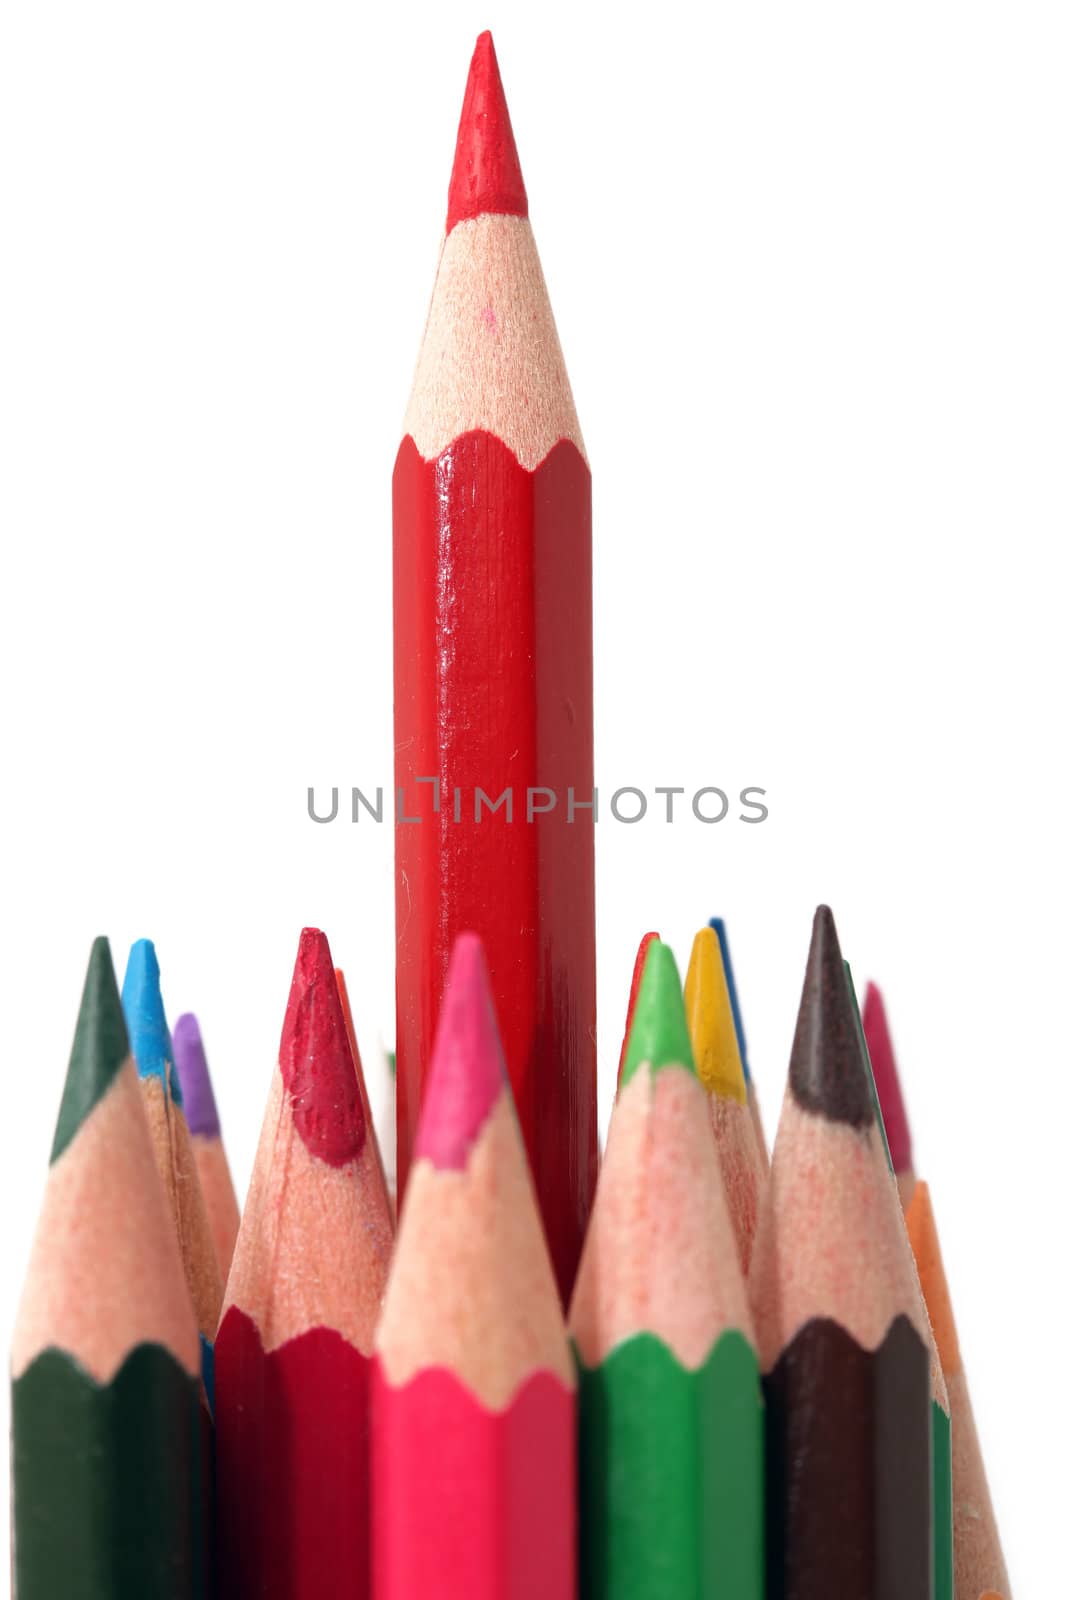 long red pencil and colorful pencils closeup detail isolated with copyspace